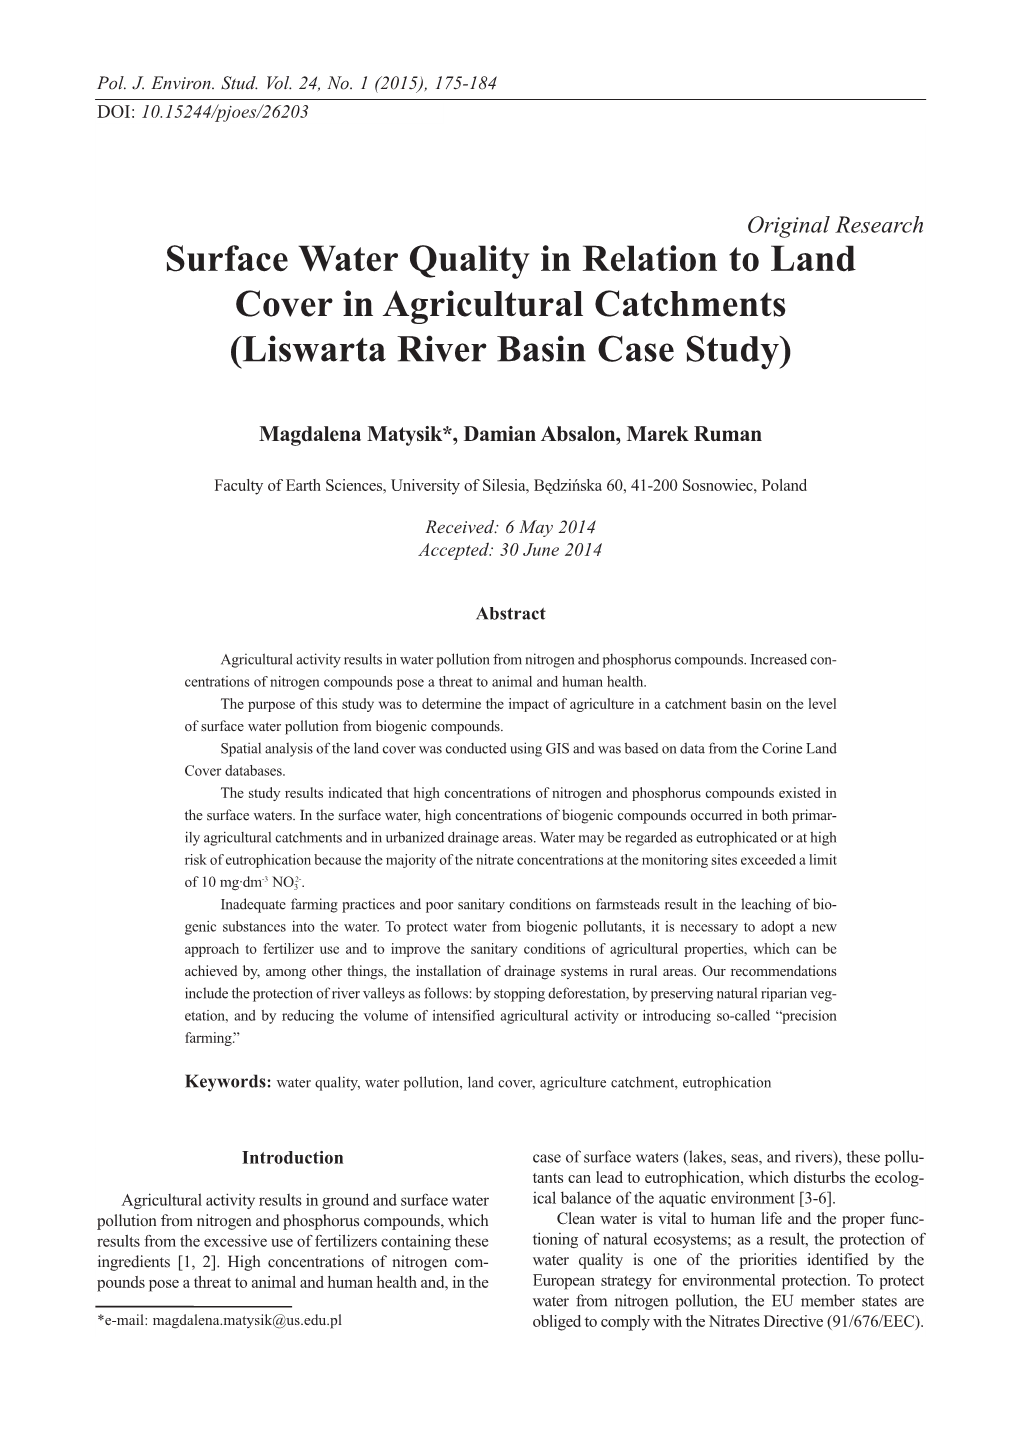 Surface Water Quality in Relation to Land Cover in Agricultural Catchments (Liswarta River Basin Case Study)